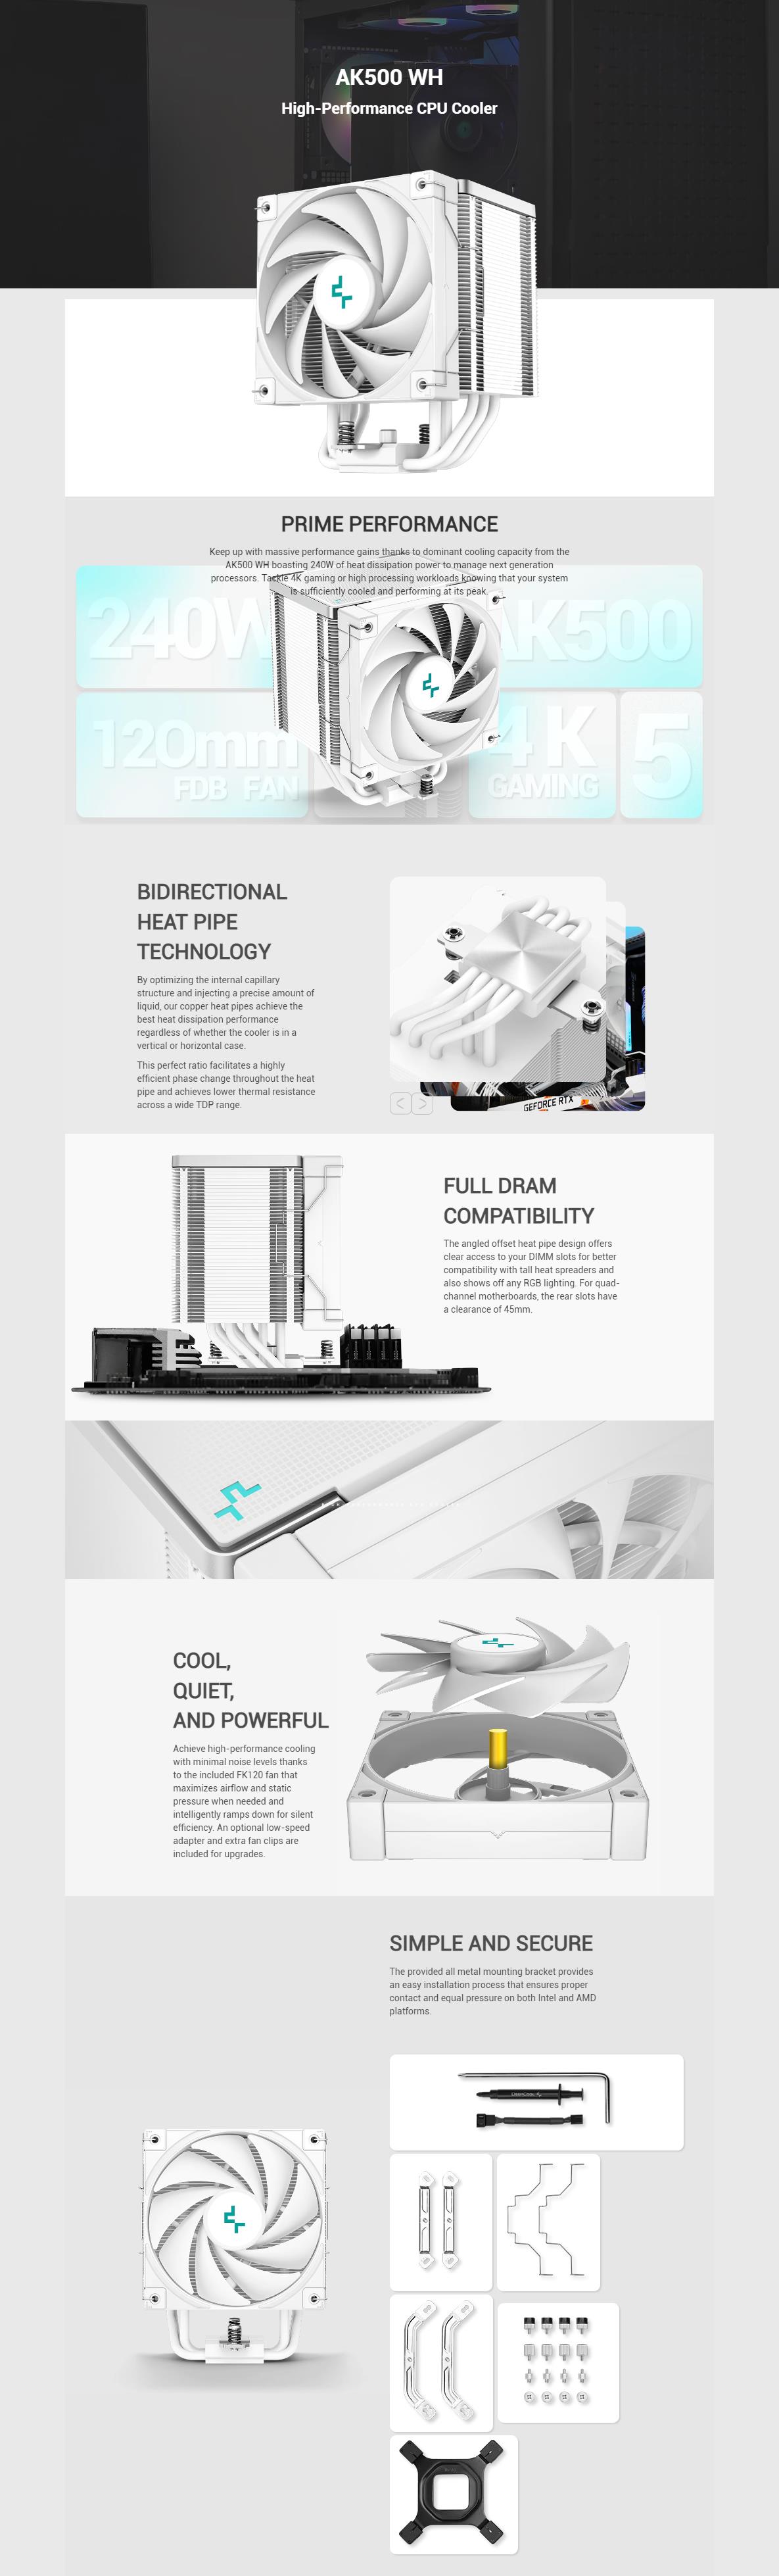 A large marketing image providing additional information about the product DeepCool AK500 CPU Cooler - White - Additional alt info not provided